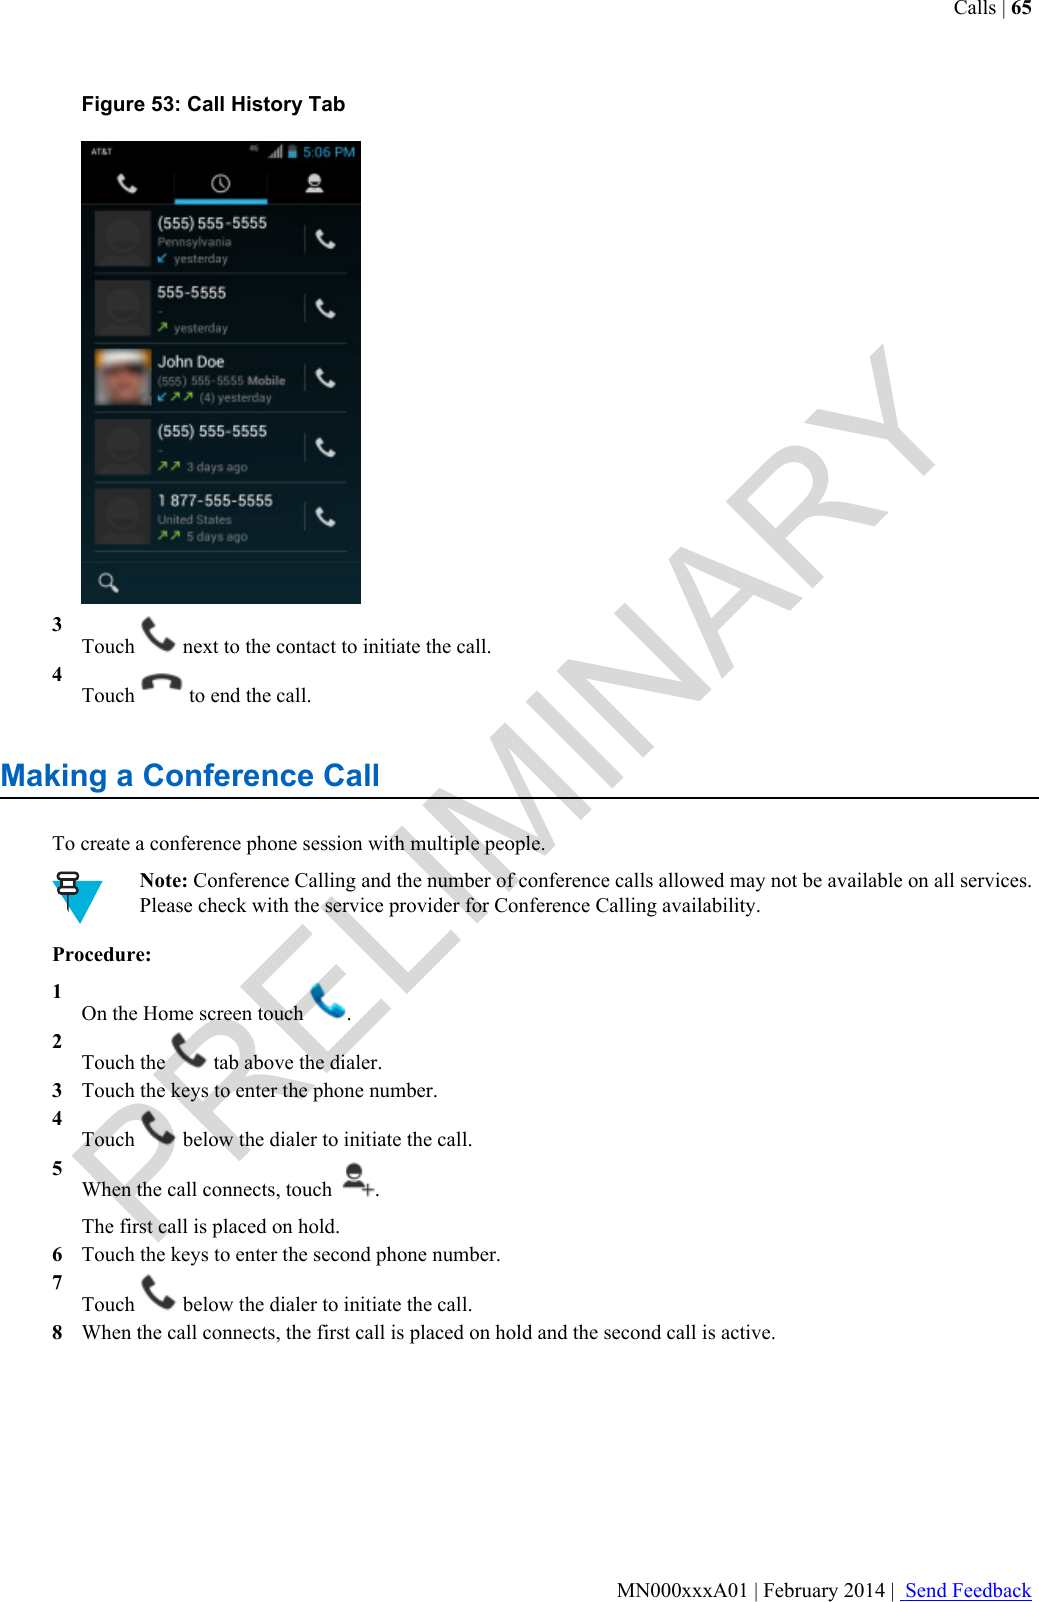 Figure 53: Call History Tab3Touch   next to the contact to initiate the call.4Touch   to end the call.Making a Conference CallTo create a conference phone session with multiple people.Note: Conference Calling and the number of conference calls allowed may not be available on all services.Please check with the service provider for Conference Calling availability.Procedure:1On the Home screen touch  .2Touch the   tab above the dialer.3Touch the keys to enter the phone number.4Touch   below the dialer to initiate the call.5When the call connects, touch  .The first call is placed on hold.6Touch the keys to enter the second phone number.7Touch   below the dialer to initiate the call.8When the call connects, the first call is placed on hold and the second call is active.Calls | 65MN000xxxA01 | February 2014 |  Send FeedbackPRELIMINARY